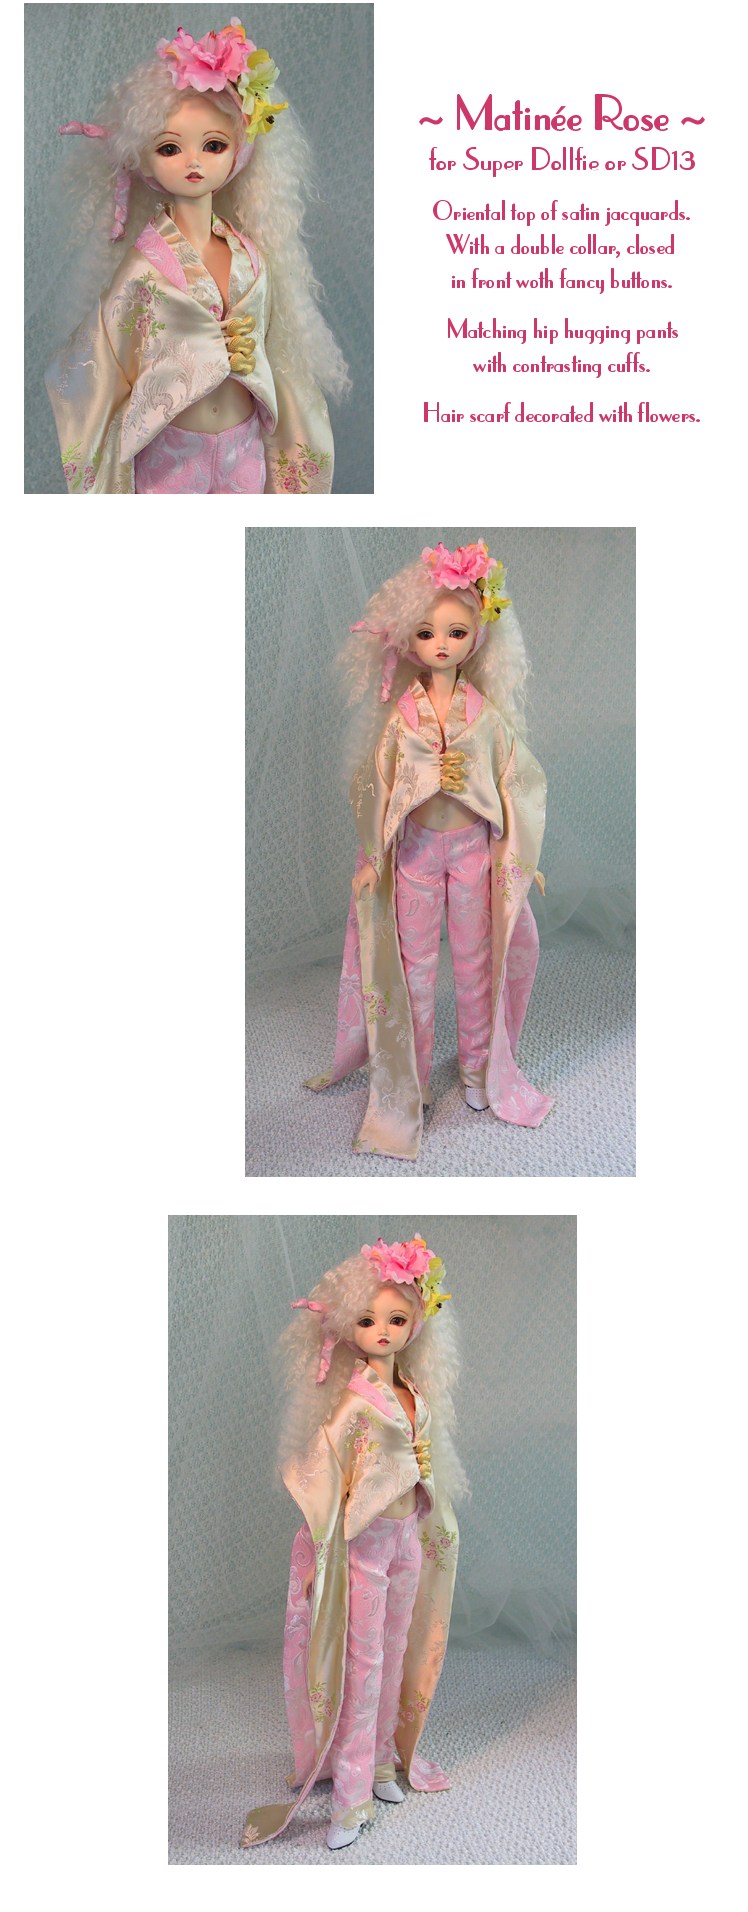 MHD Designs - Pink Morning - for Super Dollfie and SD13